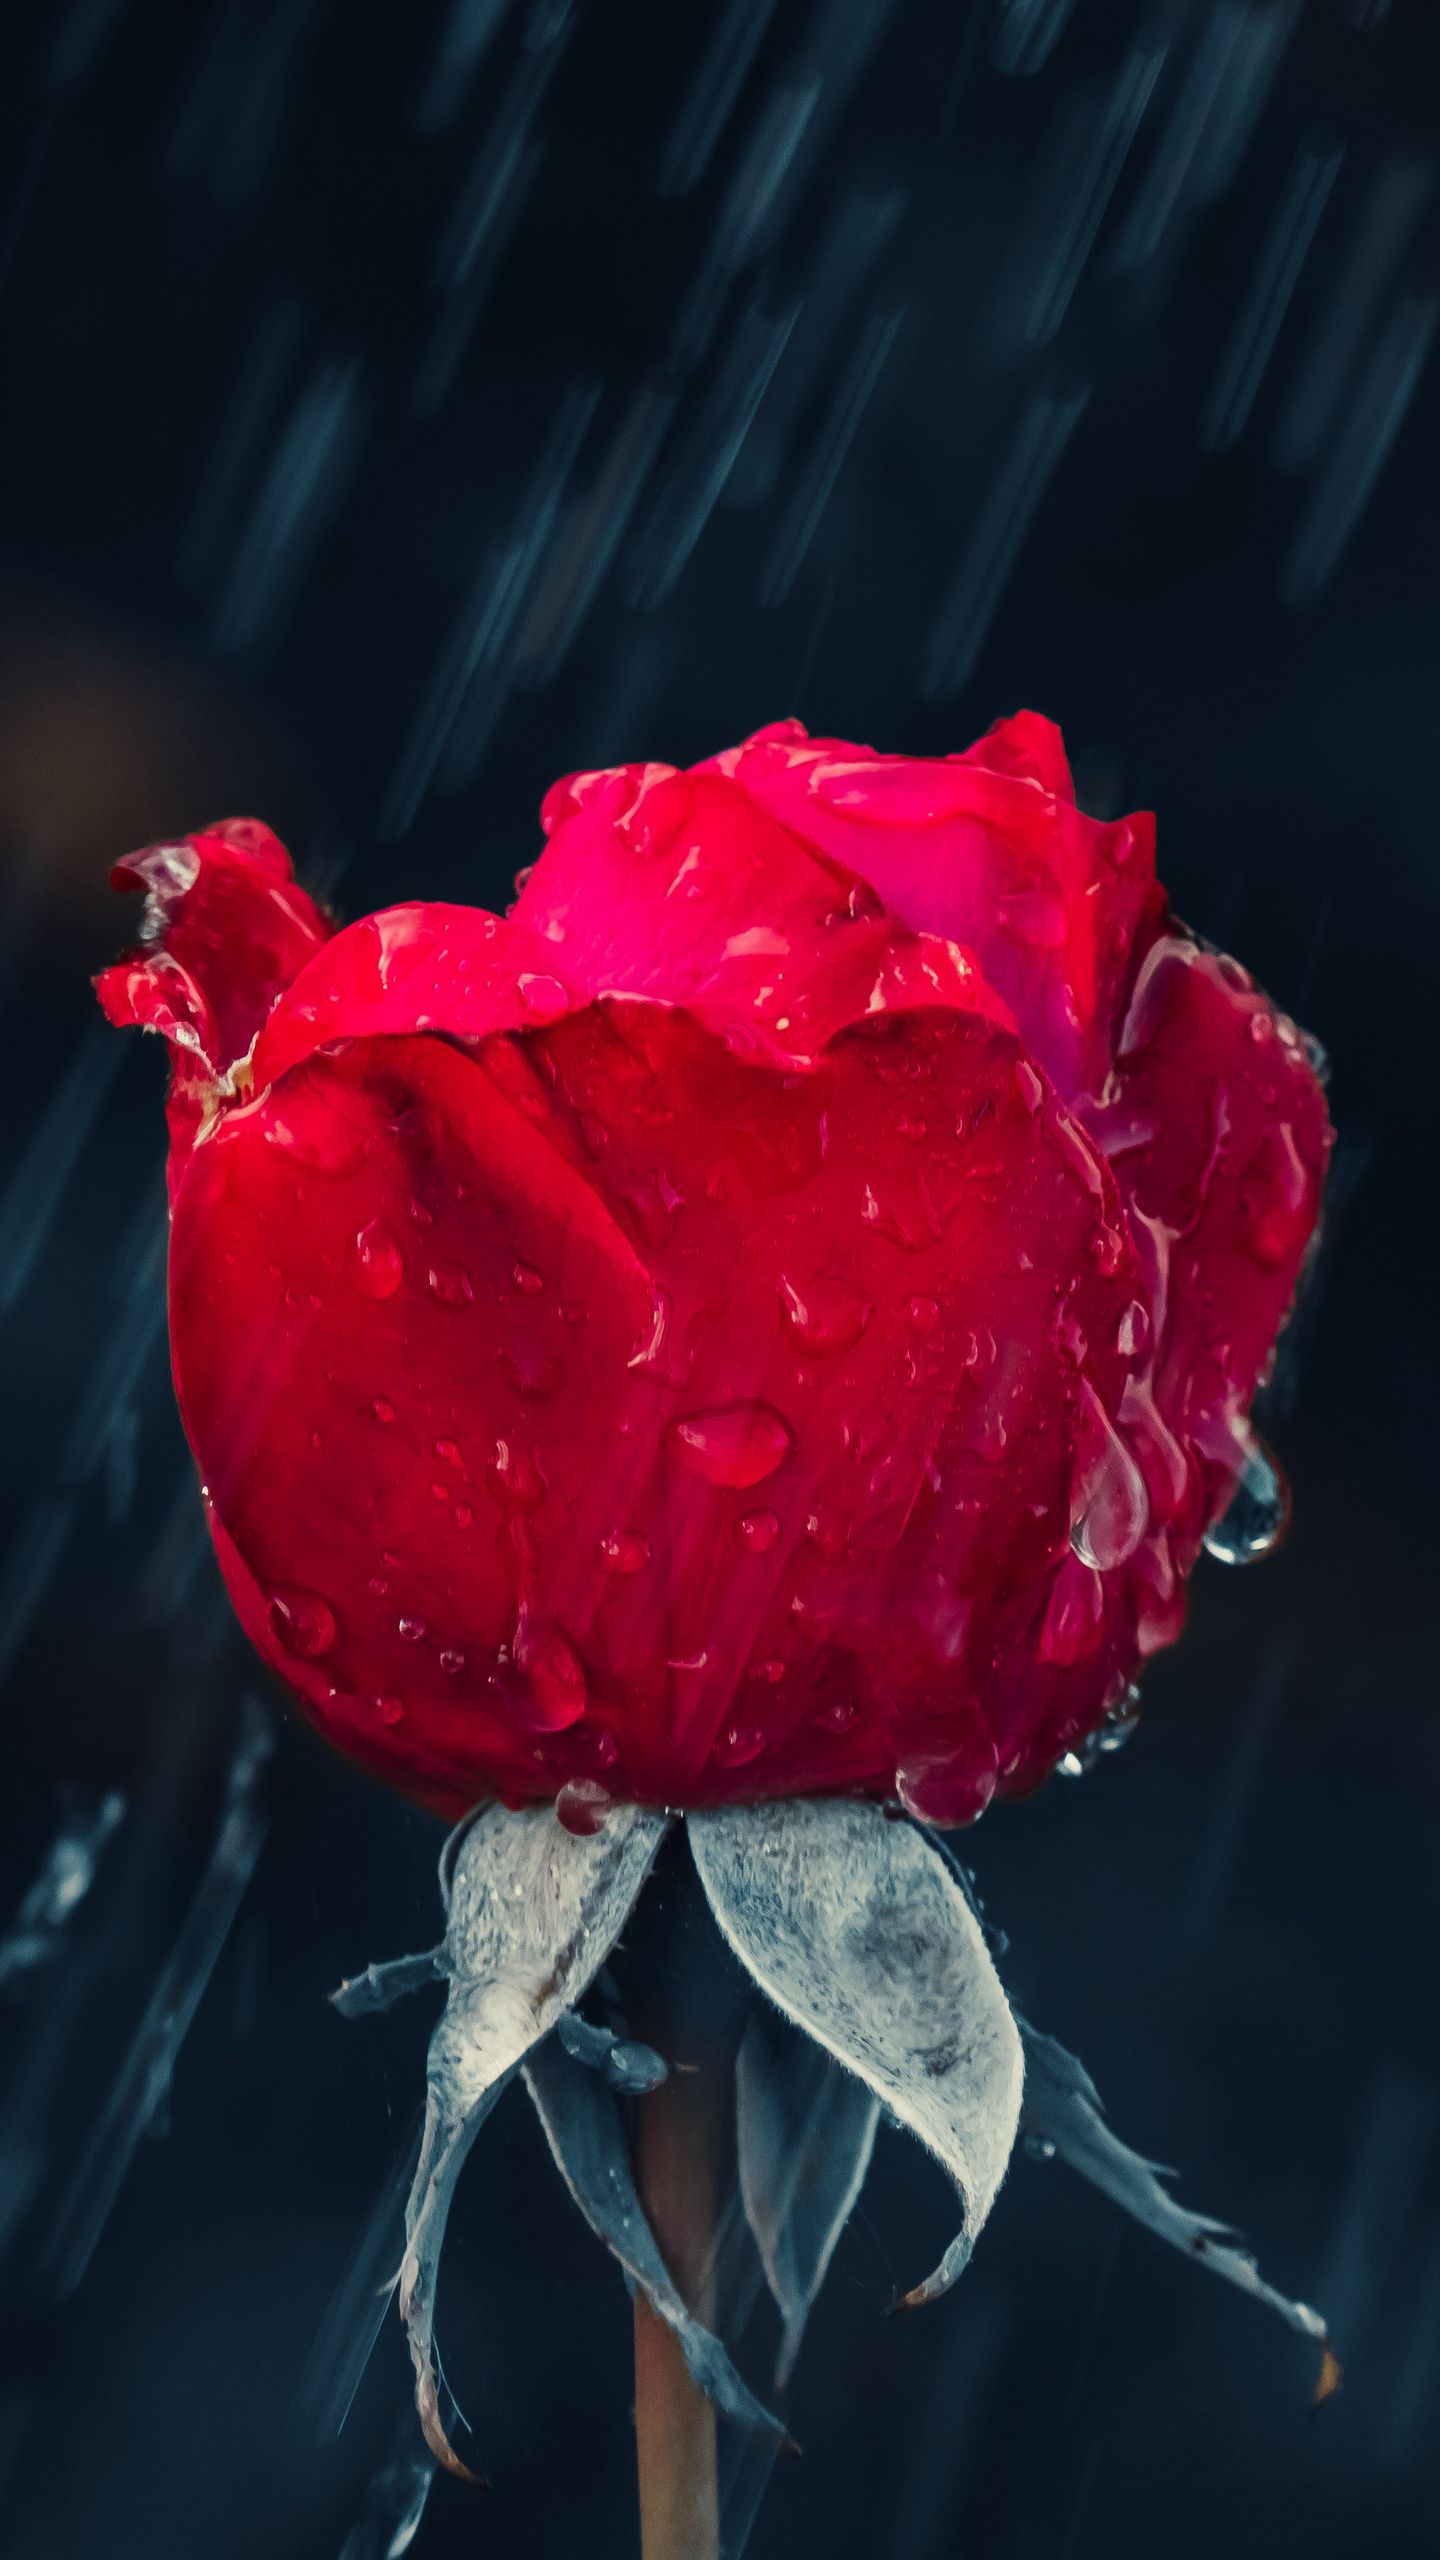 Rose rain drops moisture red wallpaper for phone, Best iPhone Wallpaper and iPhone background, WallpaperUpdate, Best iPhone Wallpaper and iPhone background